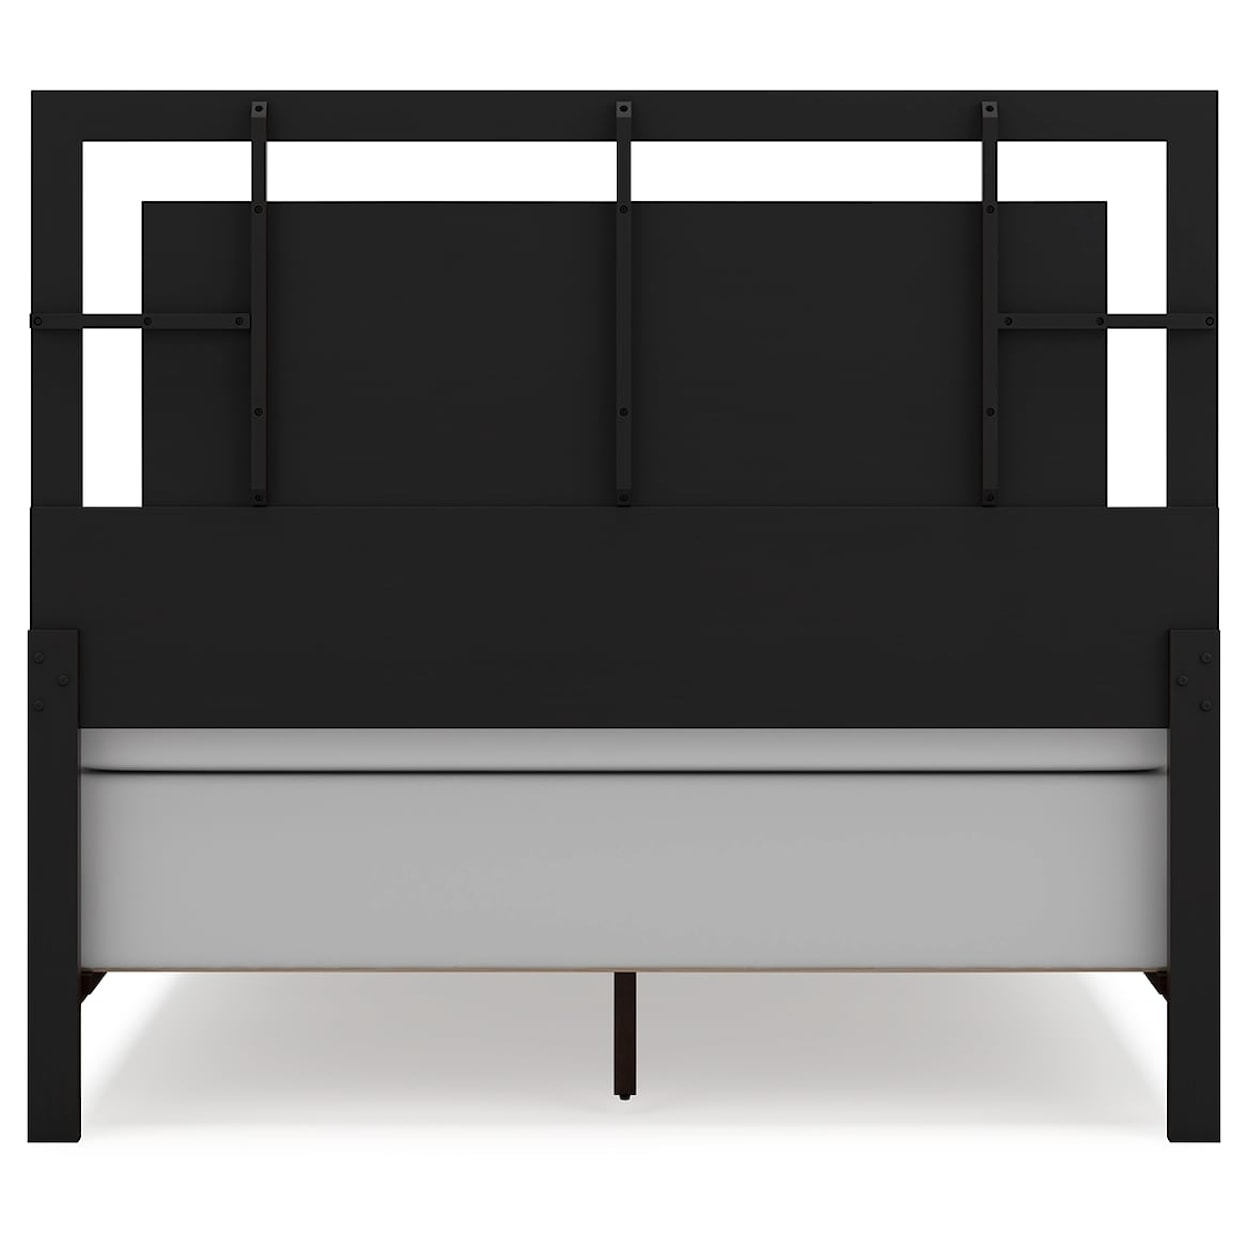 Ashley Signature Design Covetown Queen Panel Bed